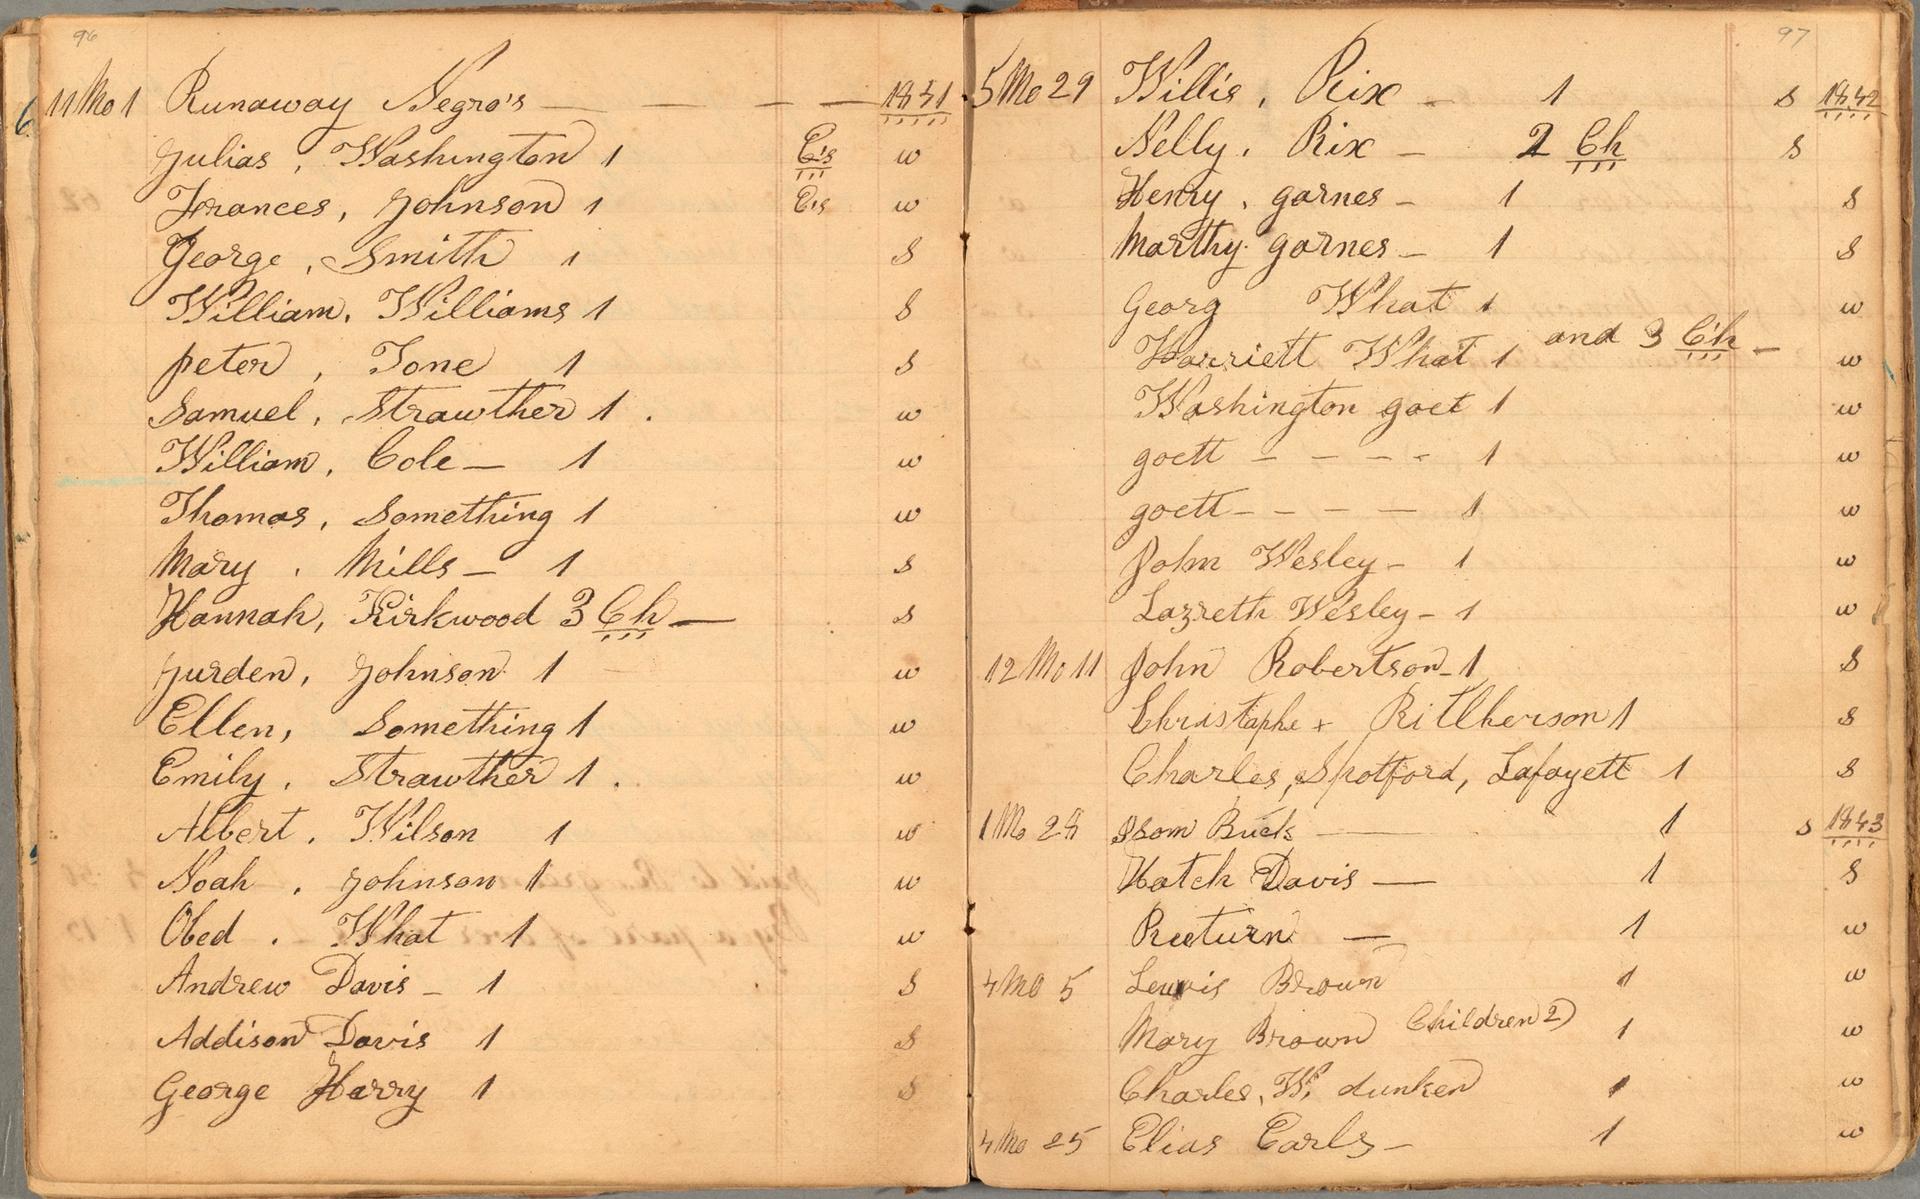 Zachariah Taylor Shugart’s account book (1851 - 1853) listing enslaved people he helped usher to freedom, p age 96 - 97 Courtesy of the Huntington Library, Art Museum, and Botanical Gardens